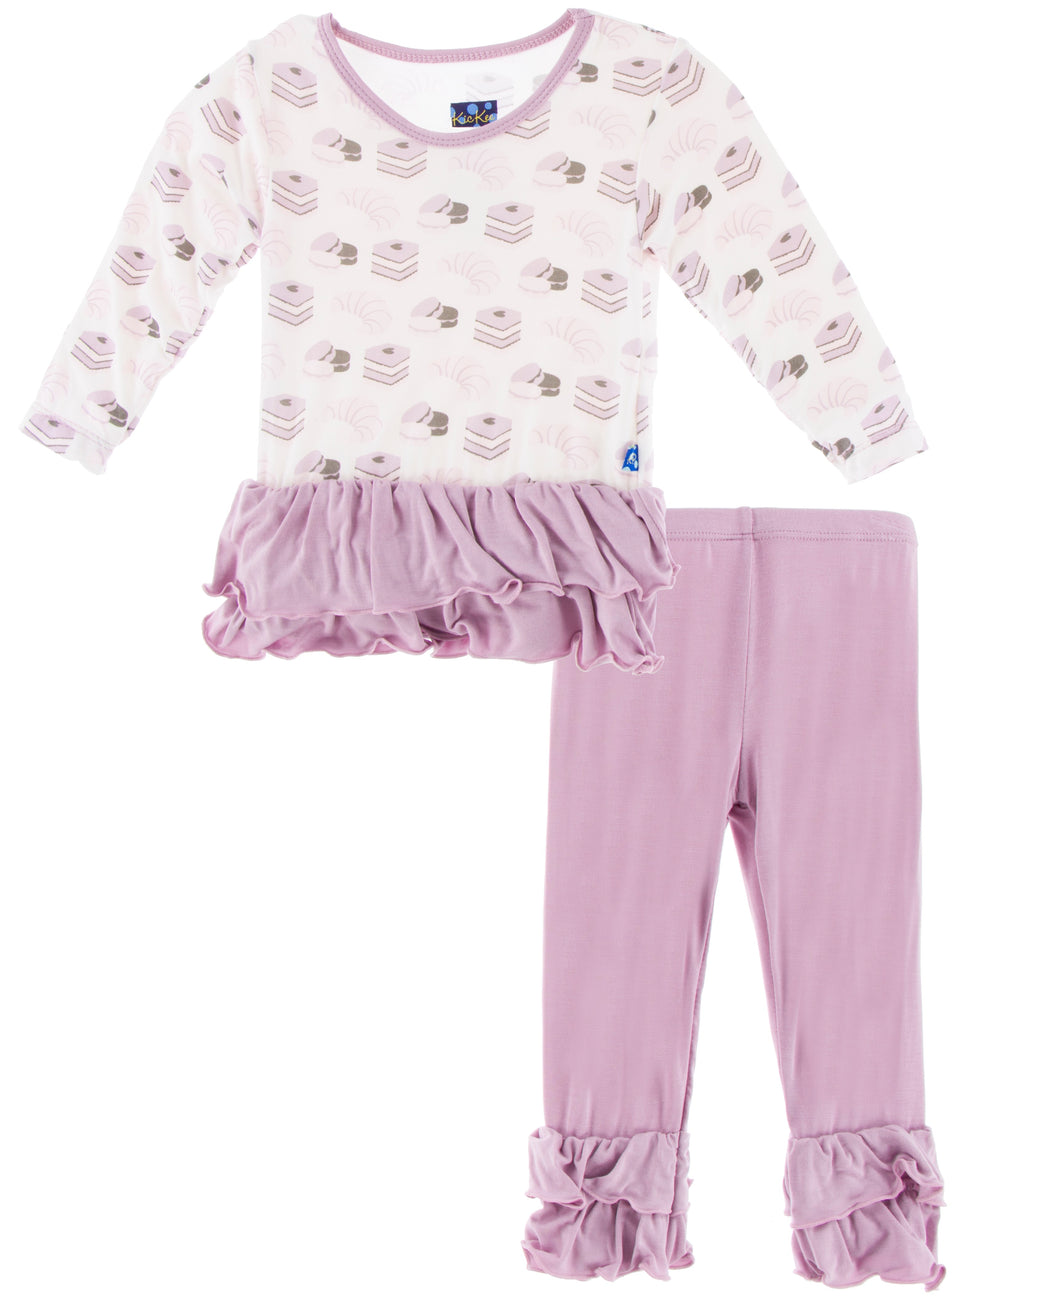 Kickee Pants LS Double Ruffle Outfit Set